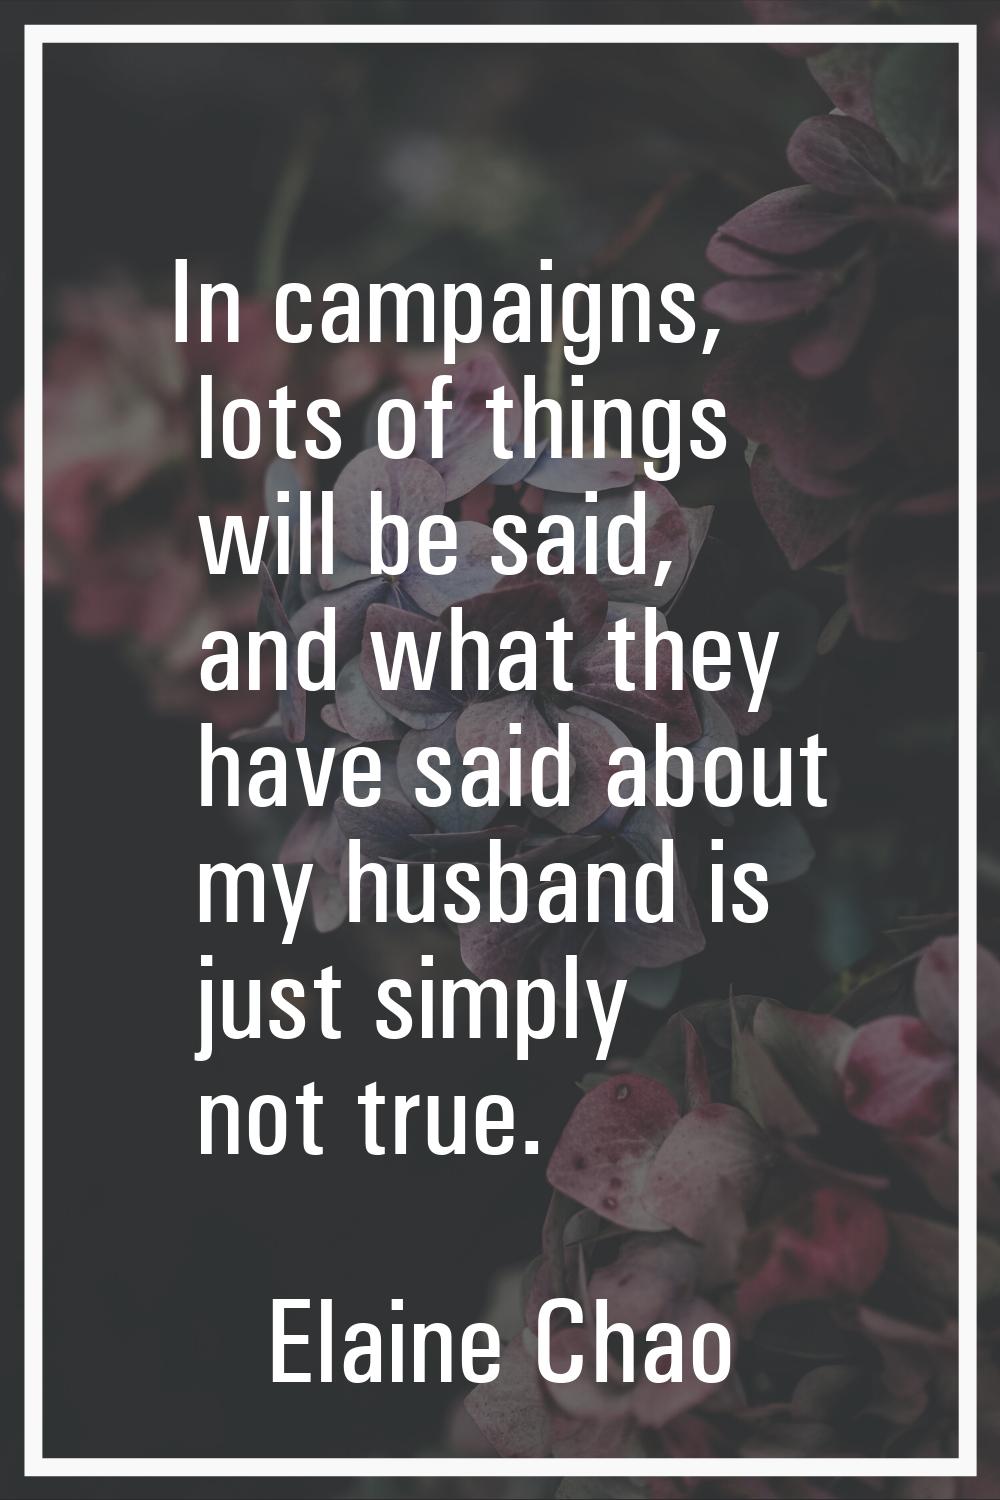 In campaigns, lots of things will be said, and what they have said about my husband is just simply 